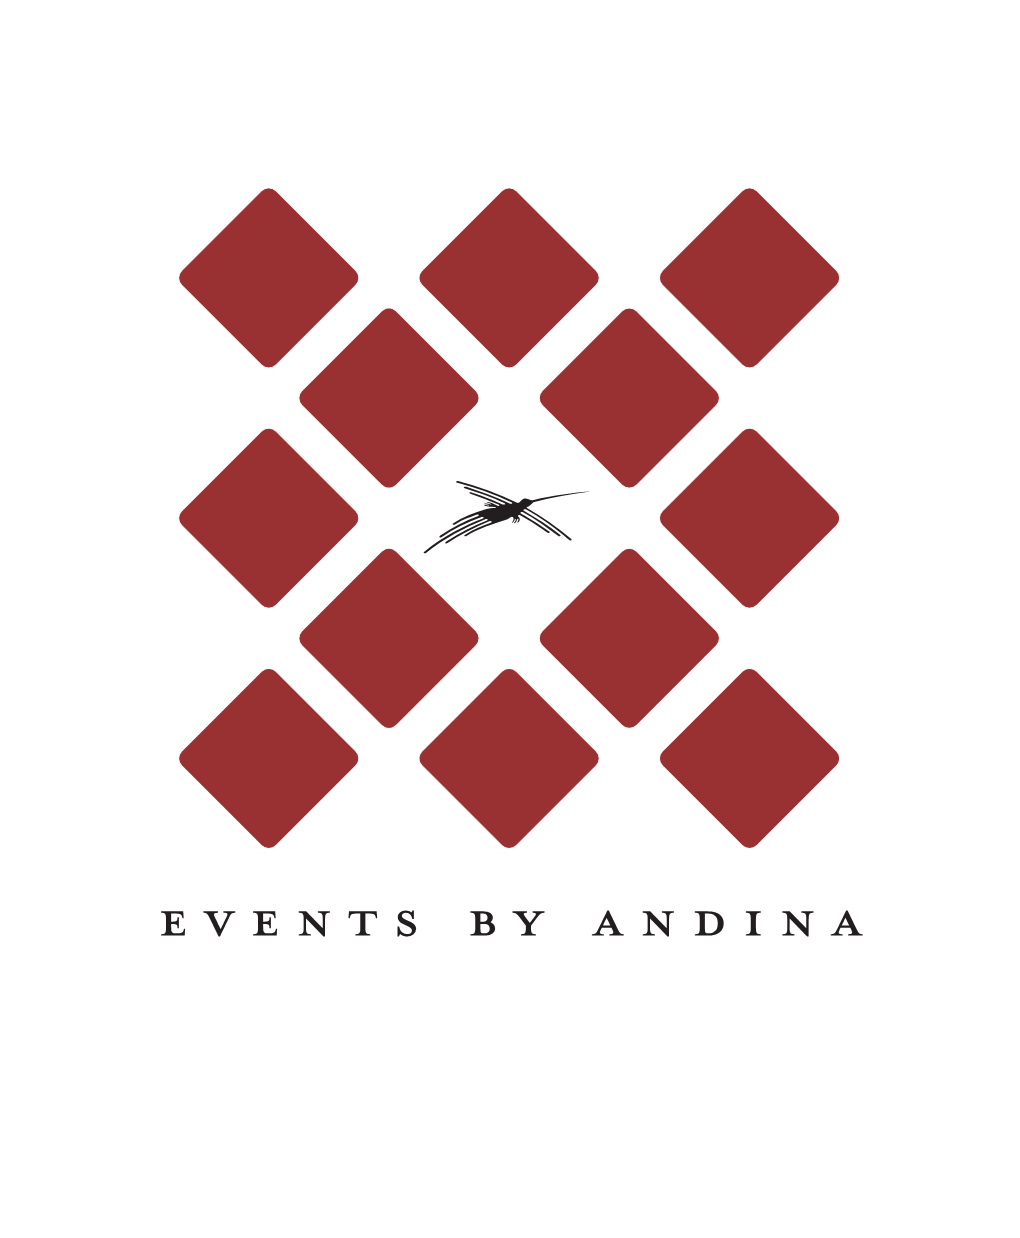 Events by Andina for MORE INFORMATION PLEASE CONTACT US at 503.228.9535 (Opt 3) Events@Andinarestaurant.Com